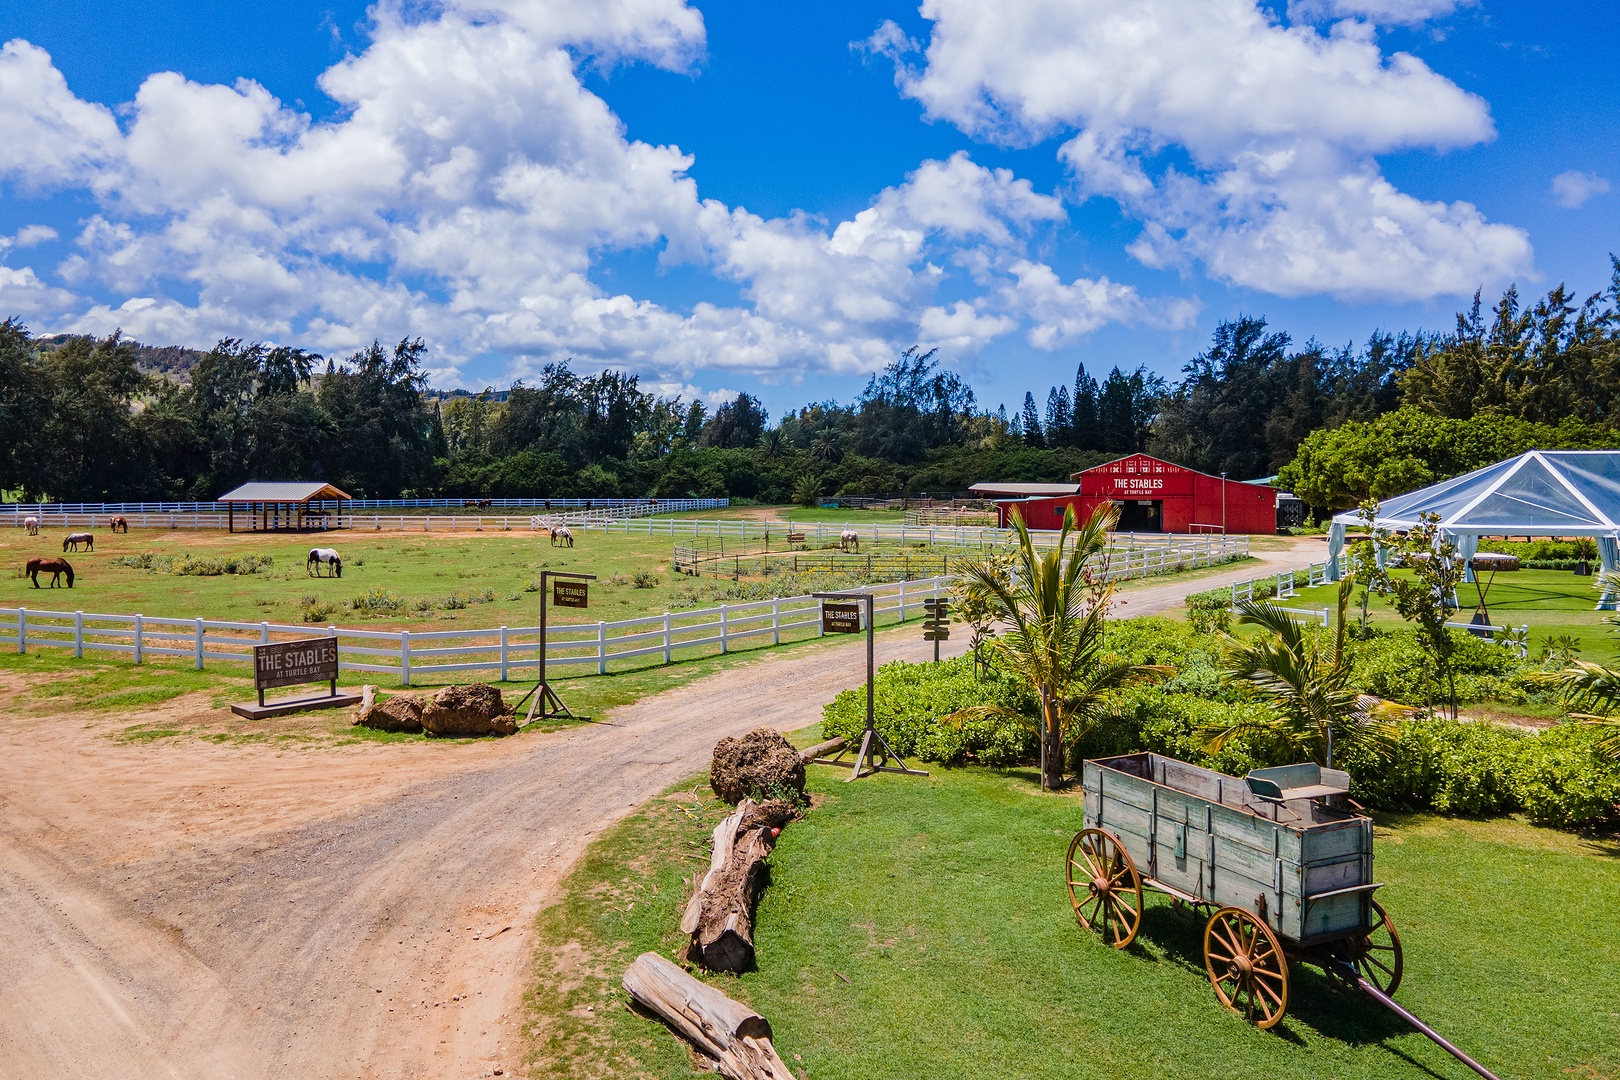 Kahuku Vacation Rentals, Kuilima Estates West #120 - Walking access to some of Turtle Bay Resort’s amenities including the horse stables